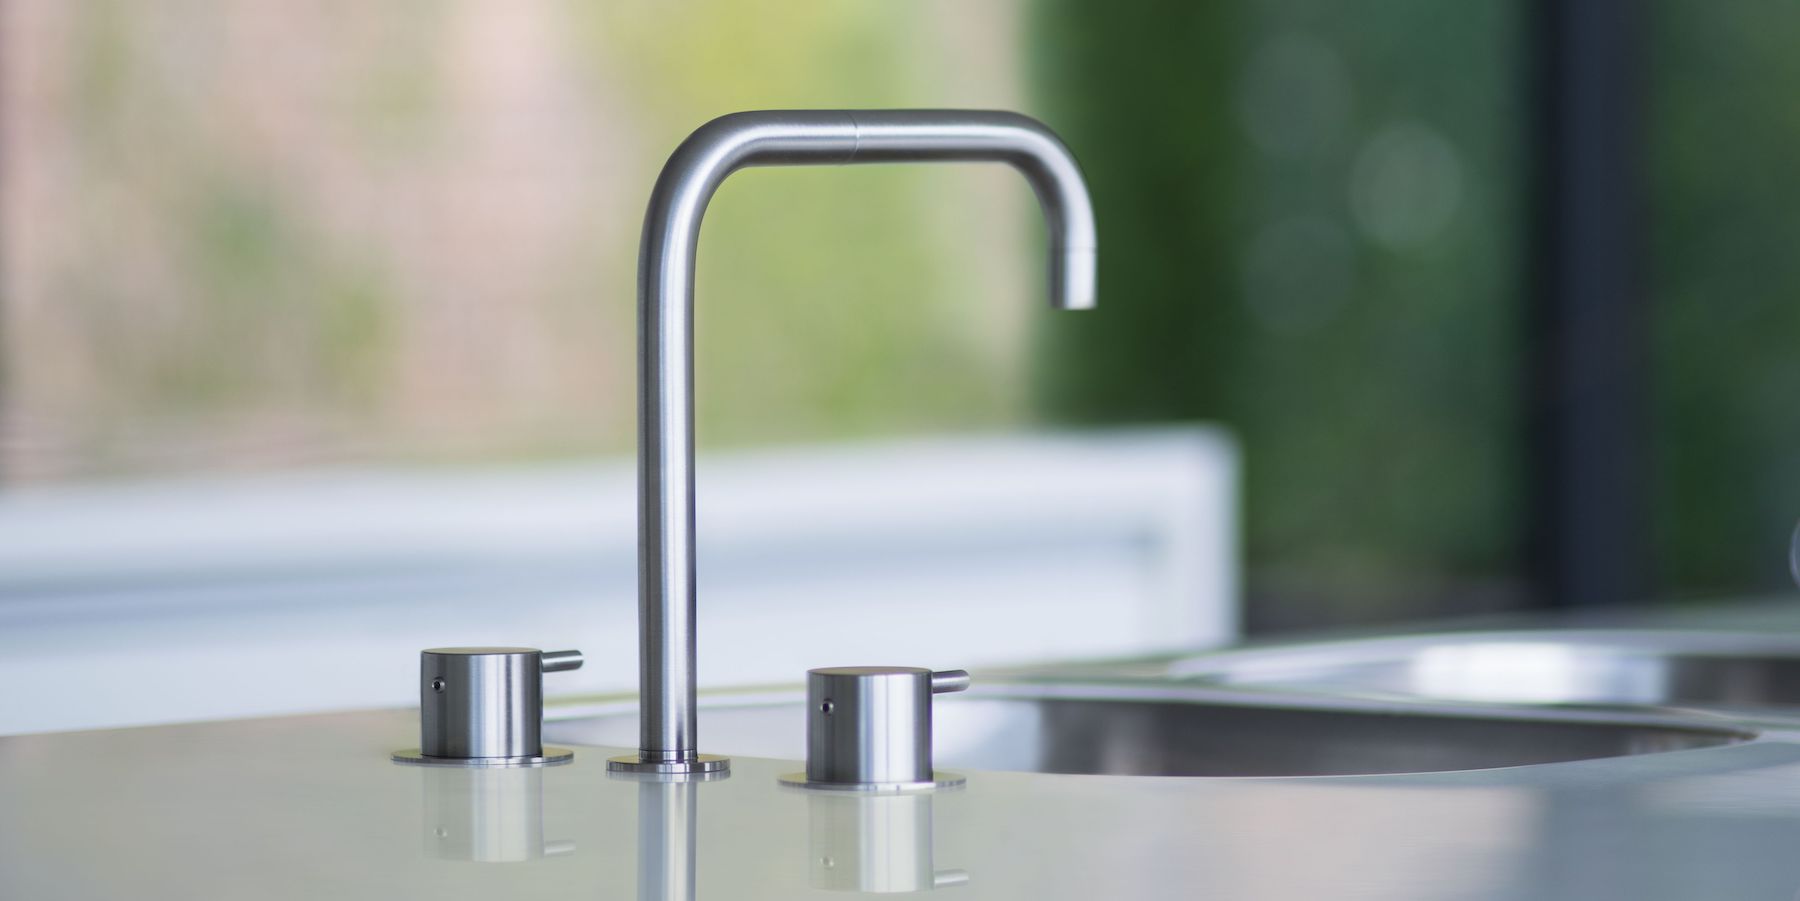 A stainless steel deck-mounted VOLA faucet